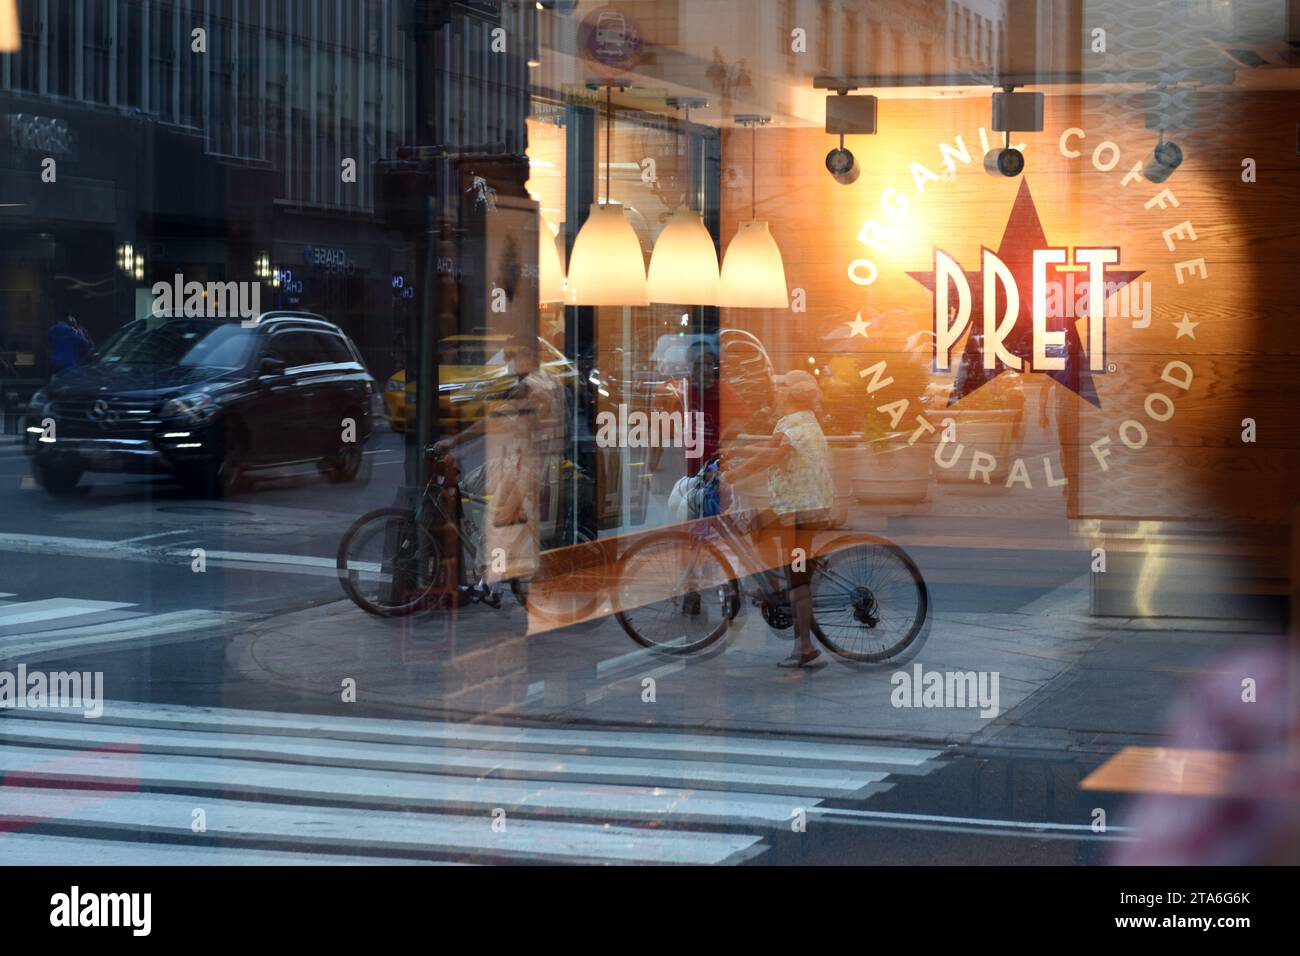 New York, USA - May 26, 2018: Fast casual restaurant Pret A Manger logo with reflection the street of  New York. Stock Photo